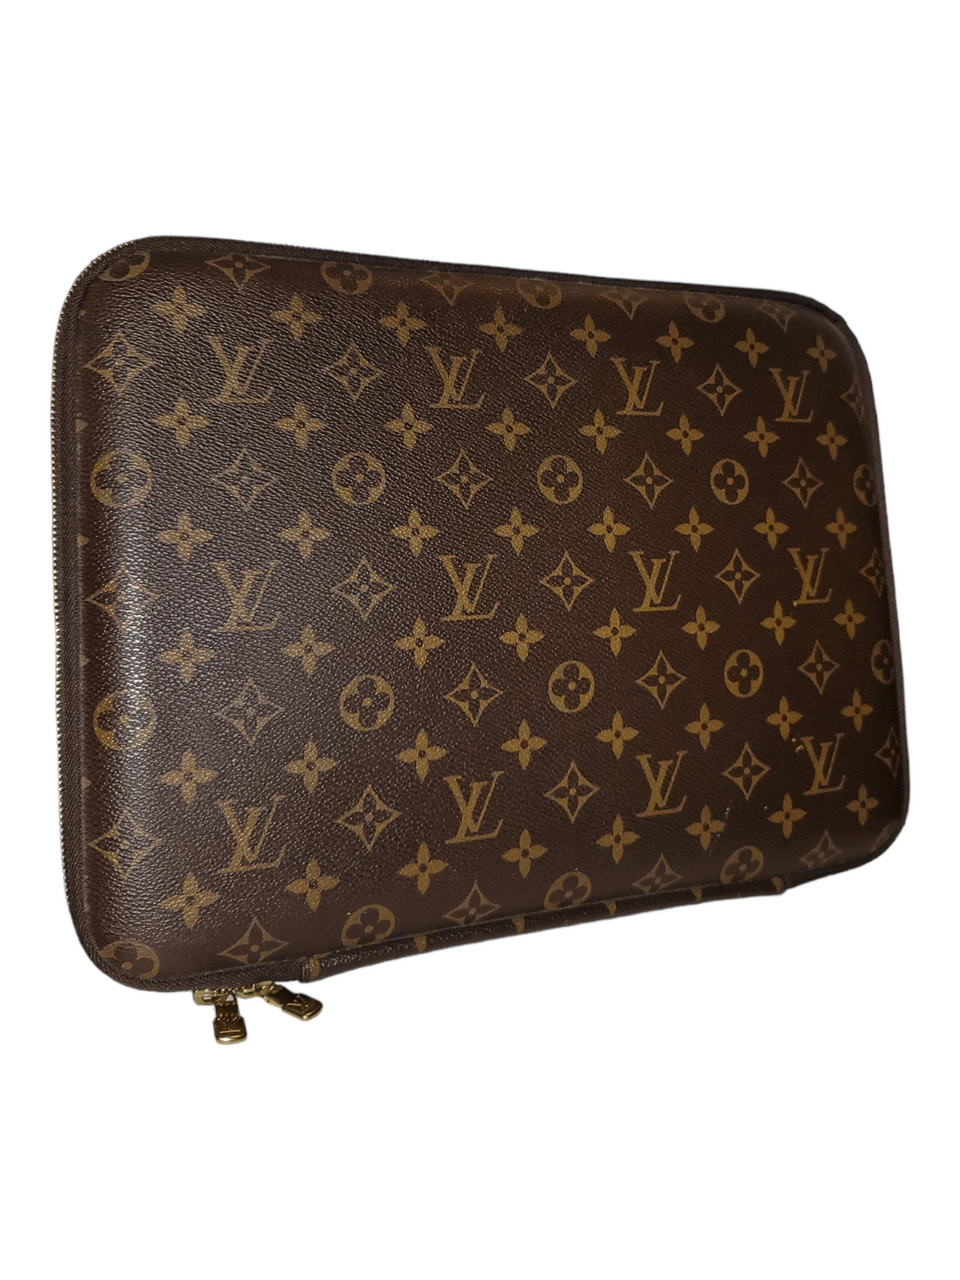 Louis Vuitton Monogram Checkbook Cover - Annie Rooster's Sally Ann's  Antiques, Collectibles And More